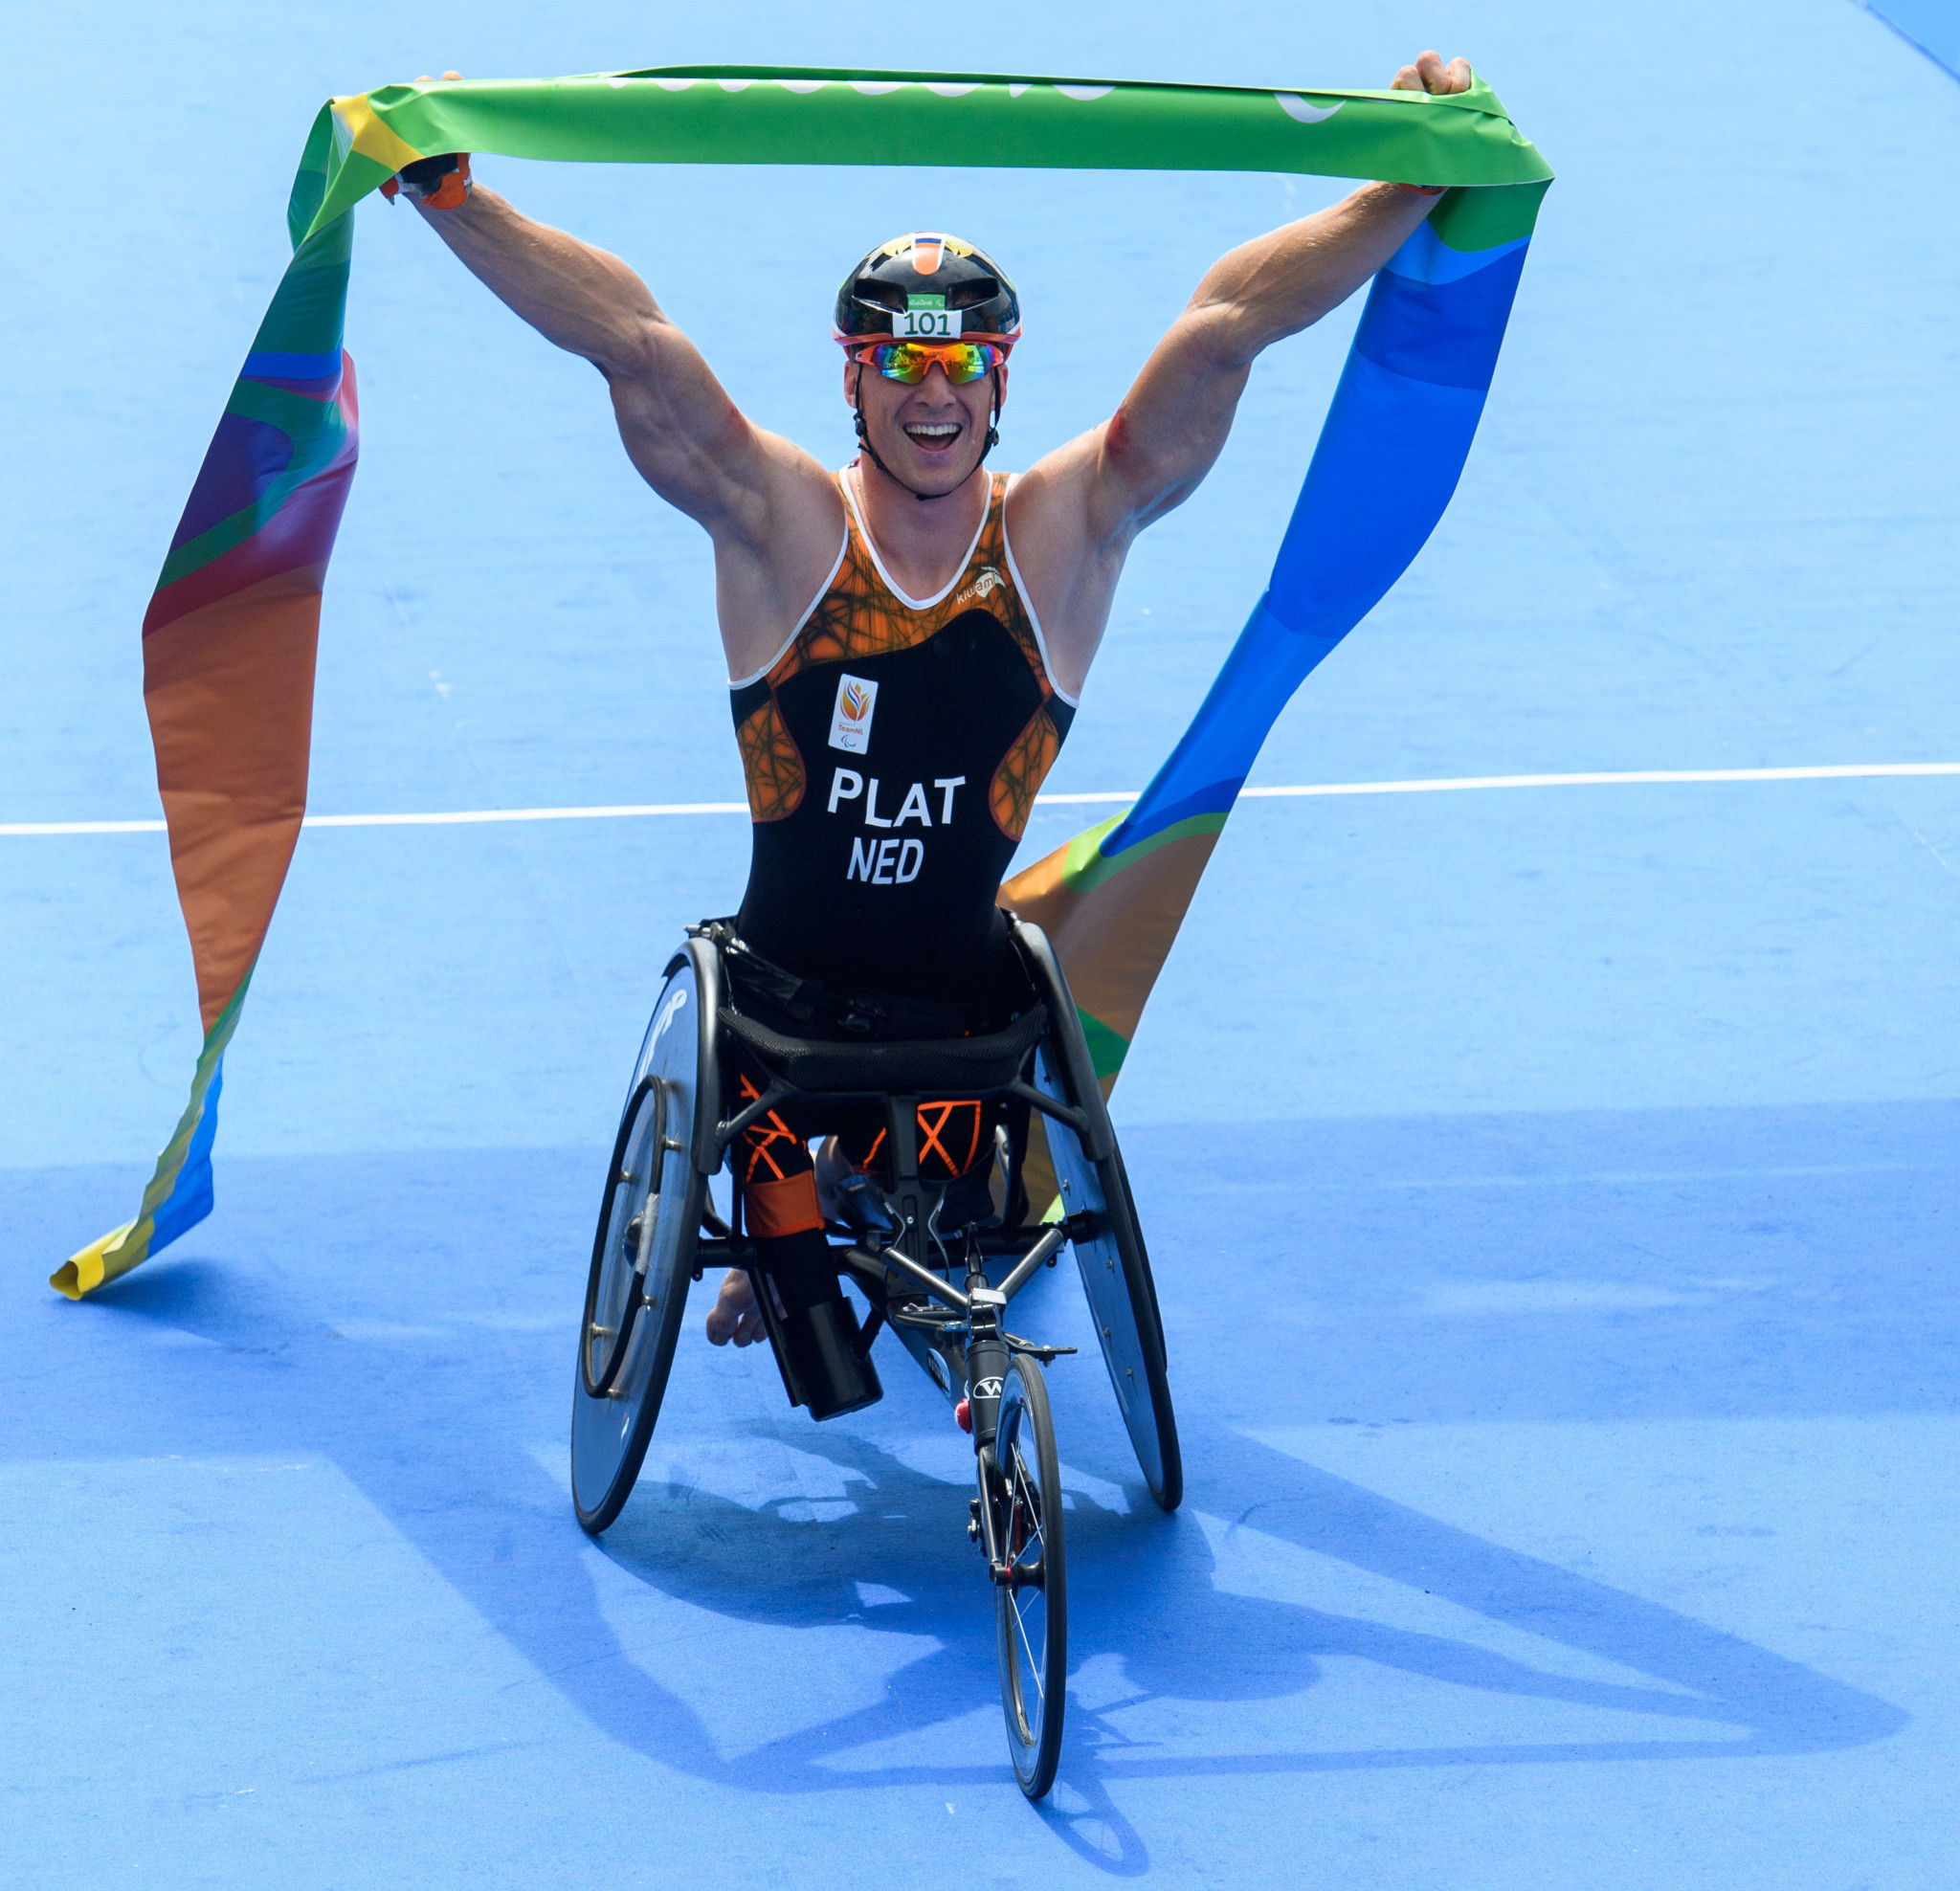 Jetze Plat will be seeking triathlon and cycling success at the Tokyo 2020 Paralympics ©Getty Images